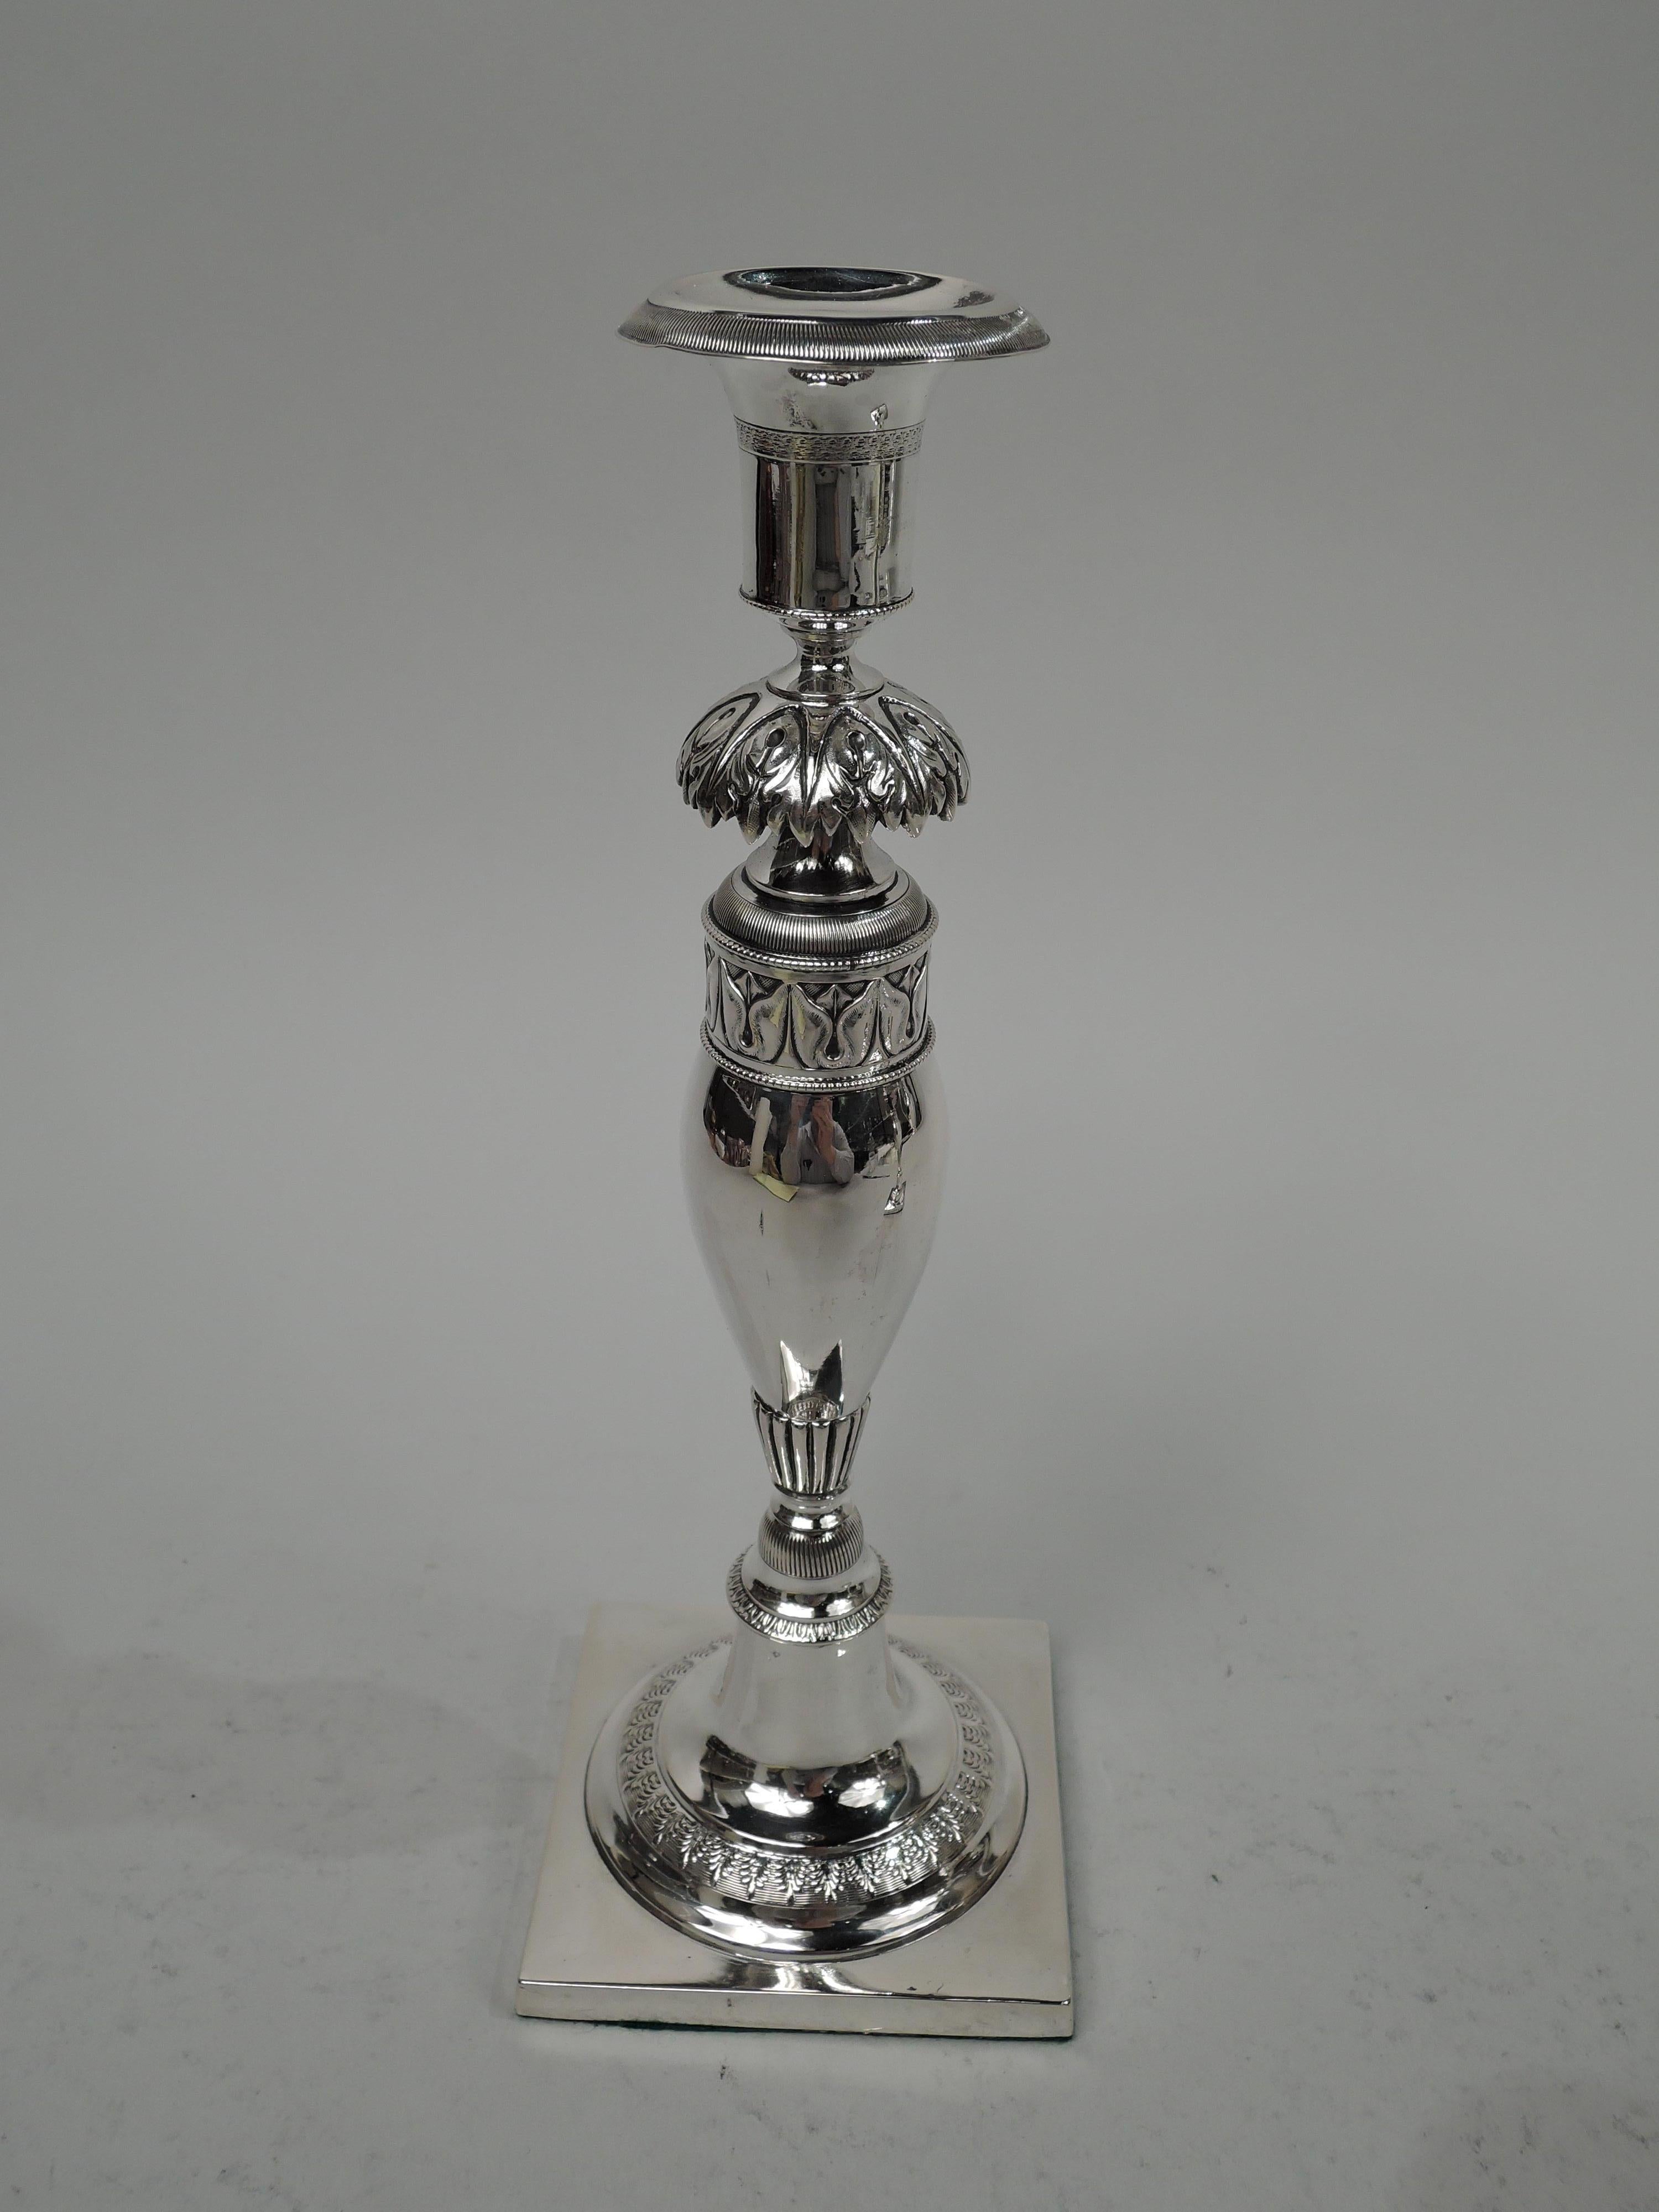 Pair of German Biedermeier Classical silver candlesticks, circa 1830. Each: Socket mounted to leaf flange in turn mounted to baluster shaft on raised round foot on square base. Fluting, gadrooning, acanthus leaf, and leaf-and-dart ornament. Marked.